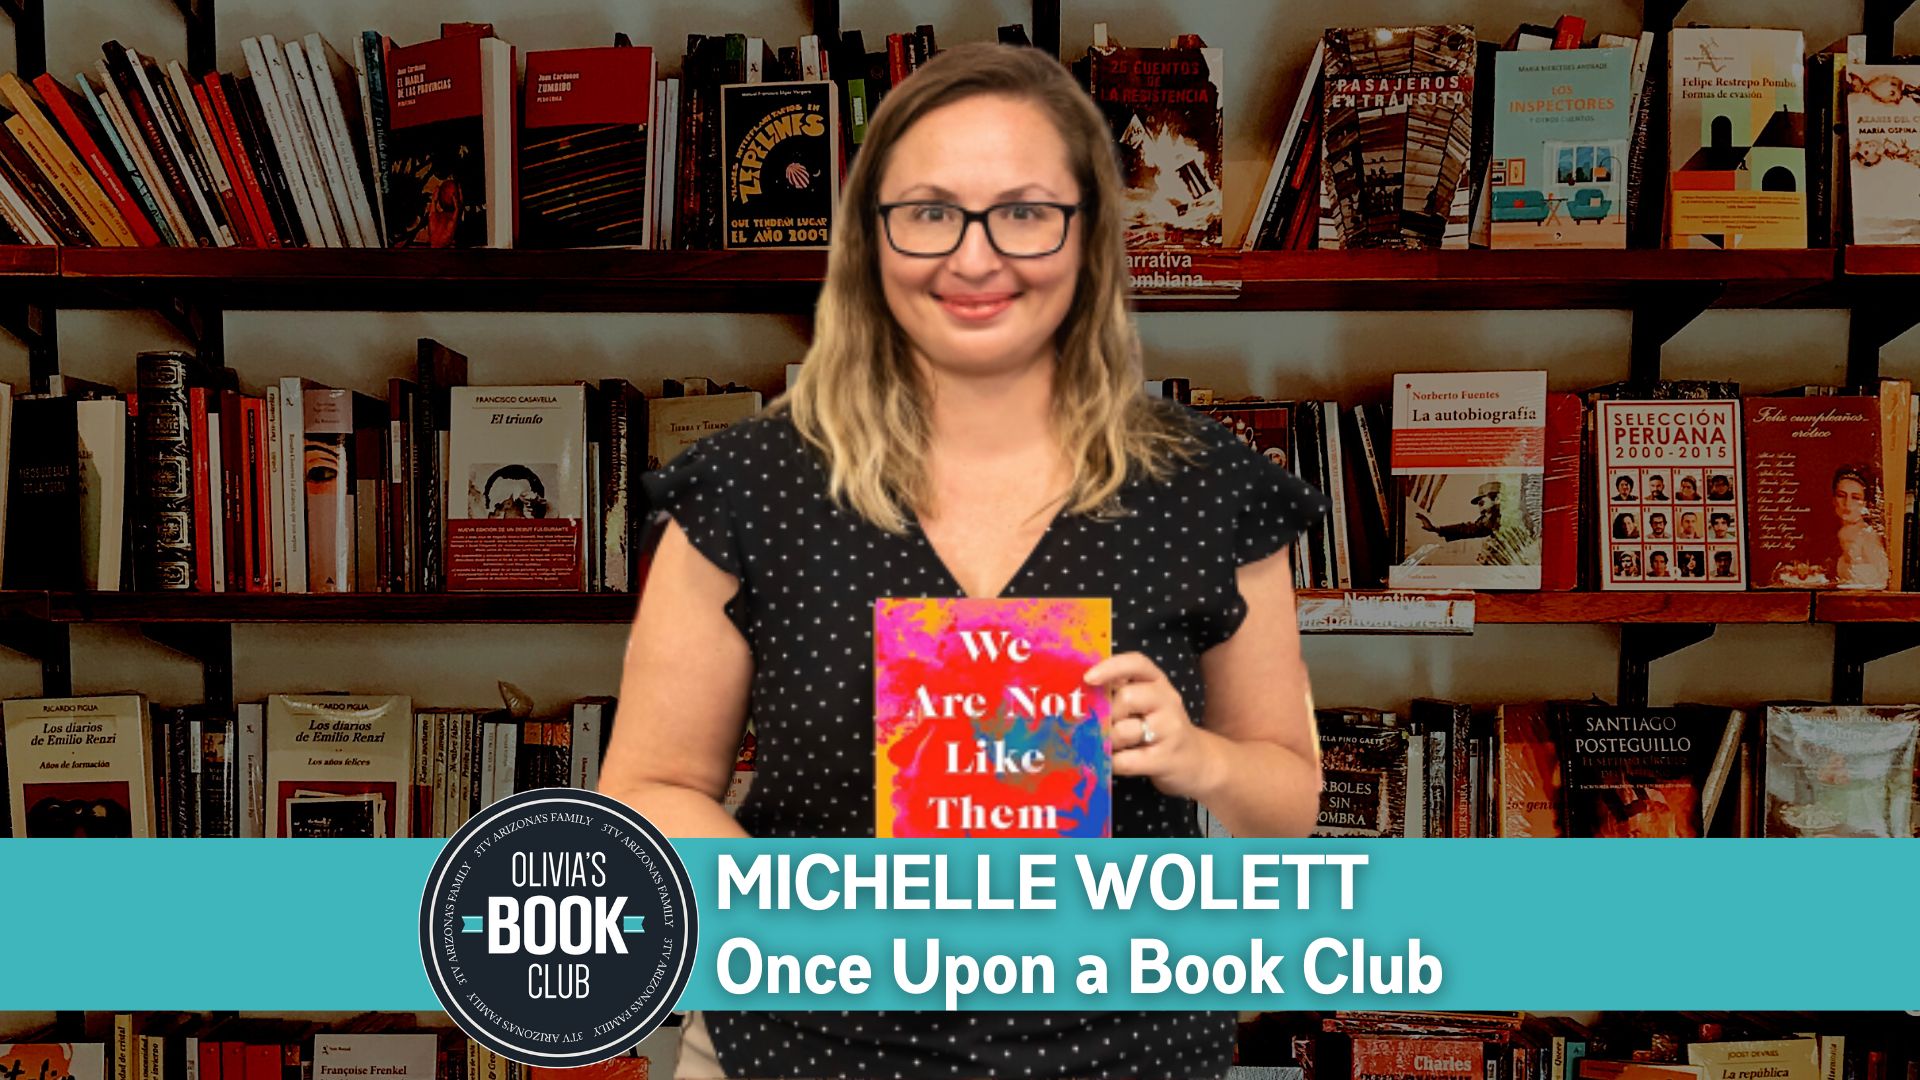 Olivias Book Club Podcast Michelle Wolett, of Once Upon a Book Club image pic